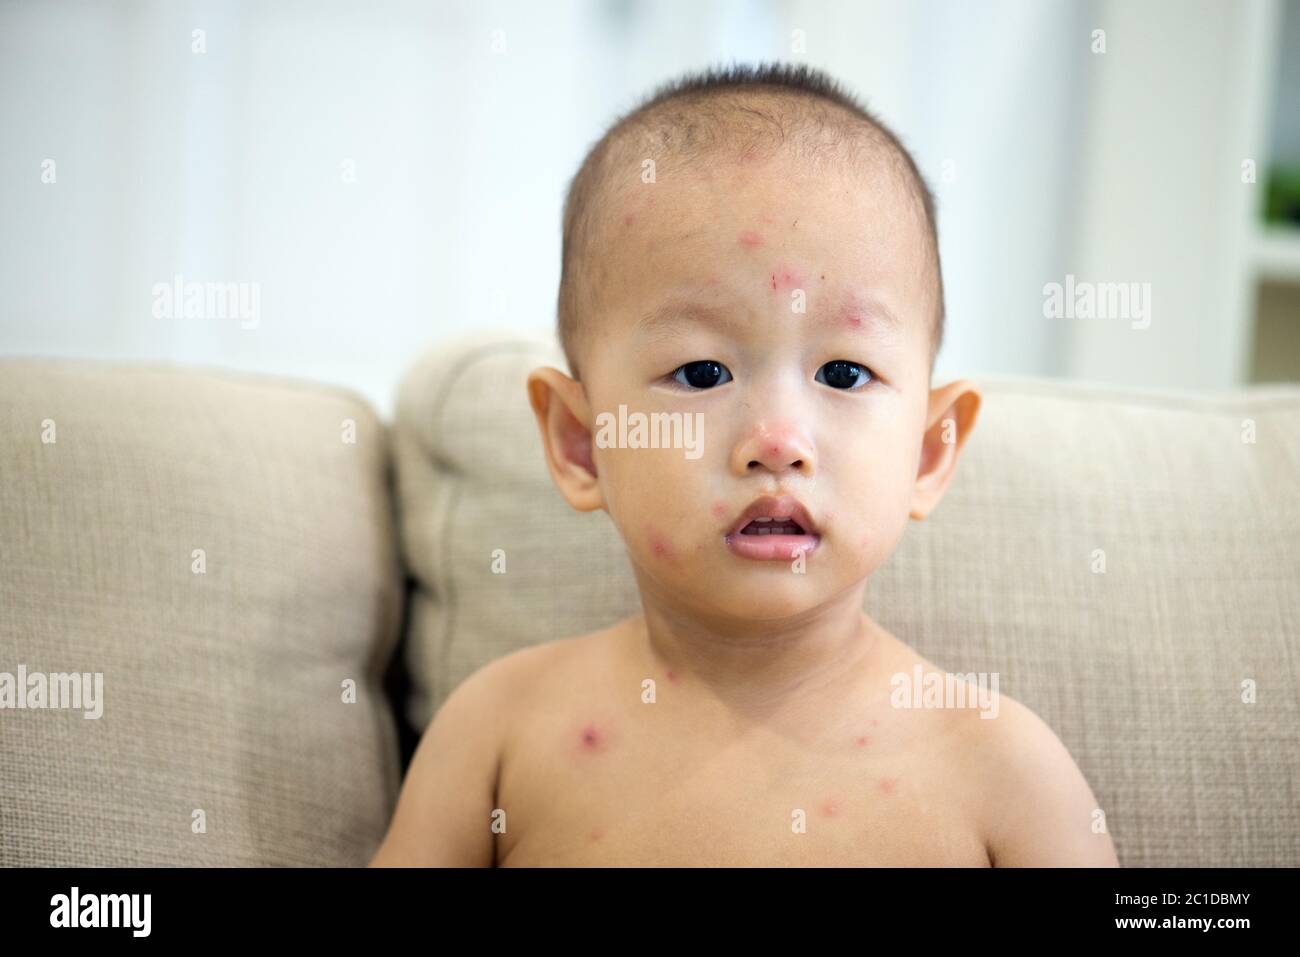 Asian twenty months old baby sitting on couch with red spots of chickenpox, natural photo. Stock Photo